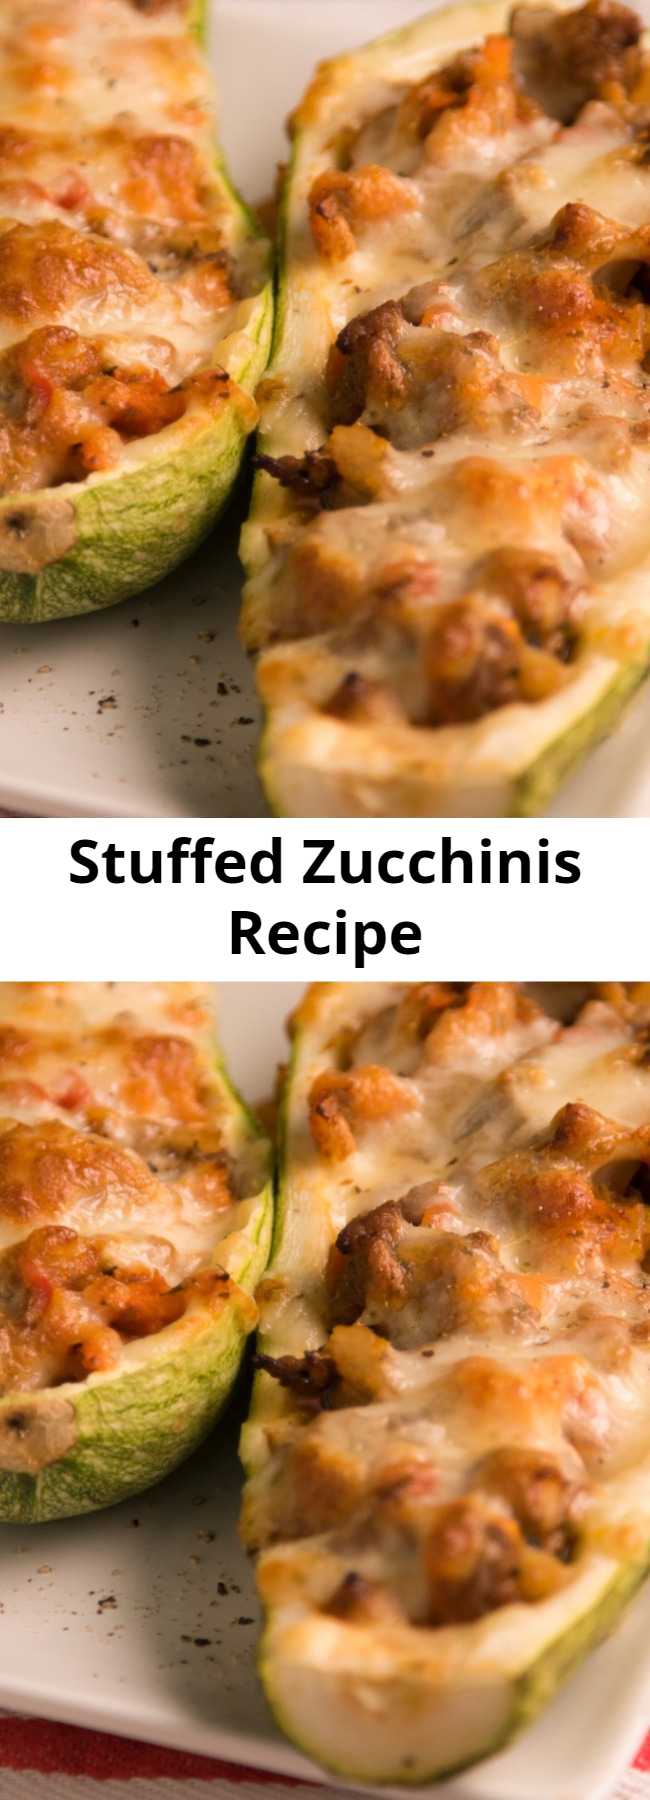 Easy Stuffed Zucchinis Recipe - This is exactly how you're going to feel after you eat this delicious meal. No regrets, though.